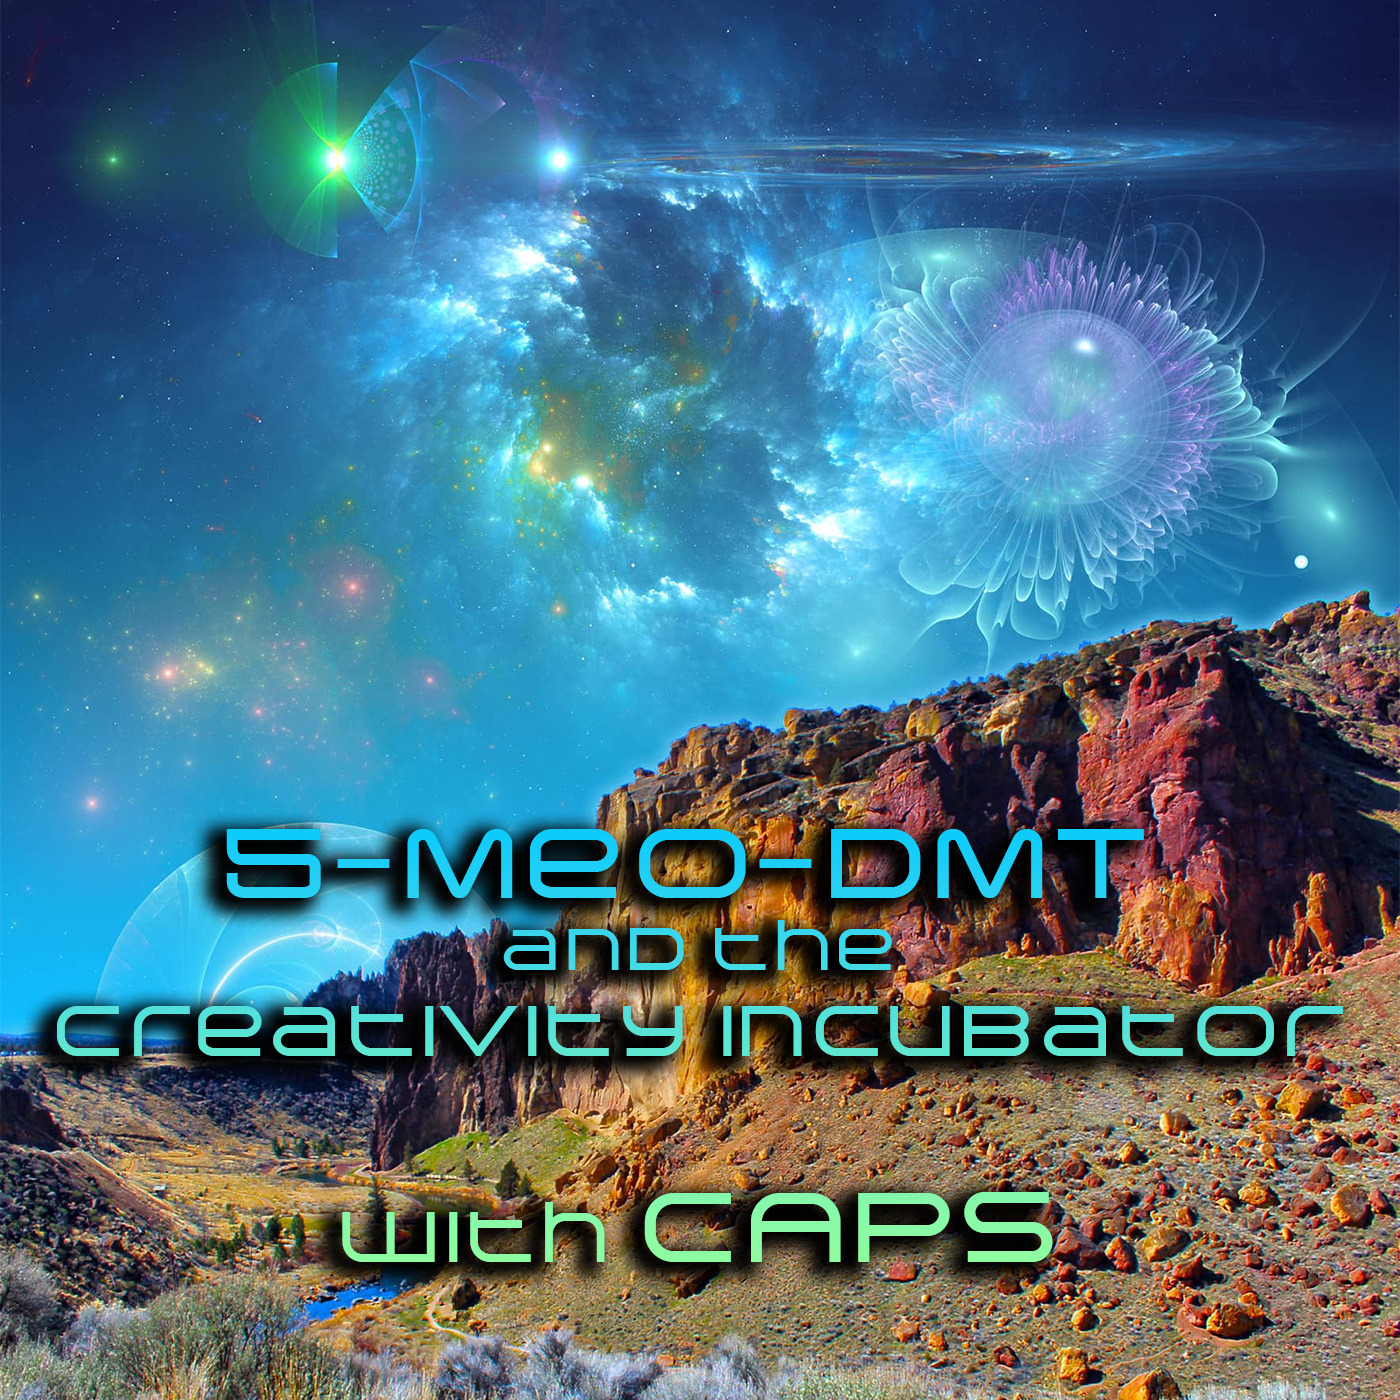 Episode 267: 5-MeO-DMT and the Creativity Incubator with Caps